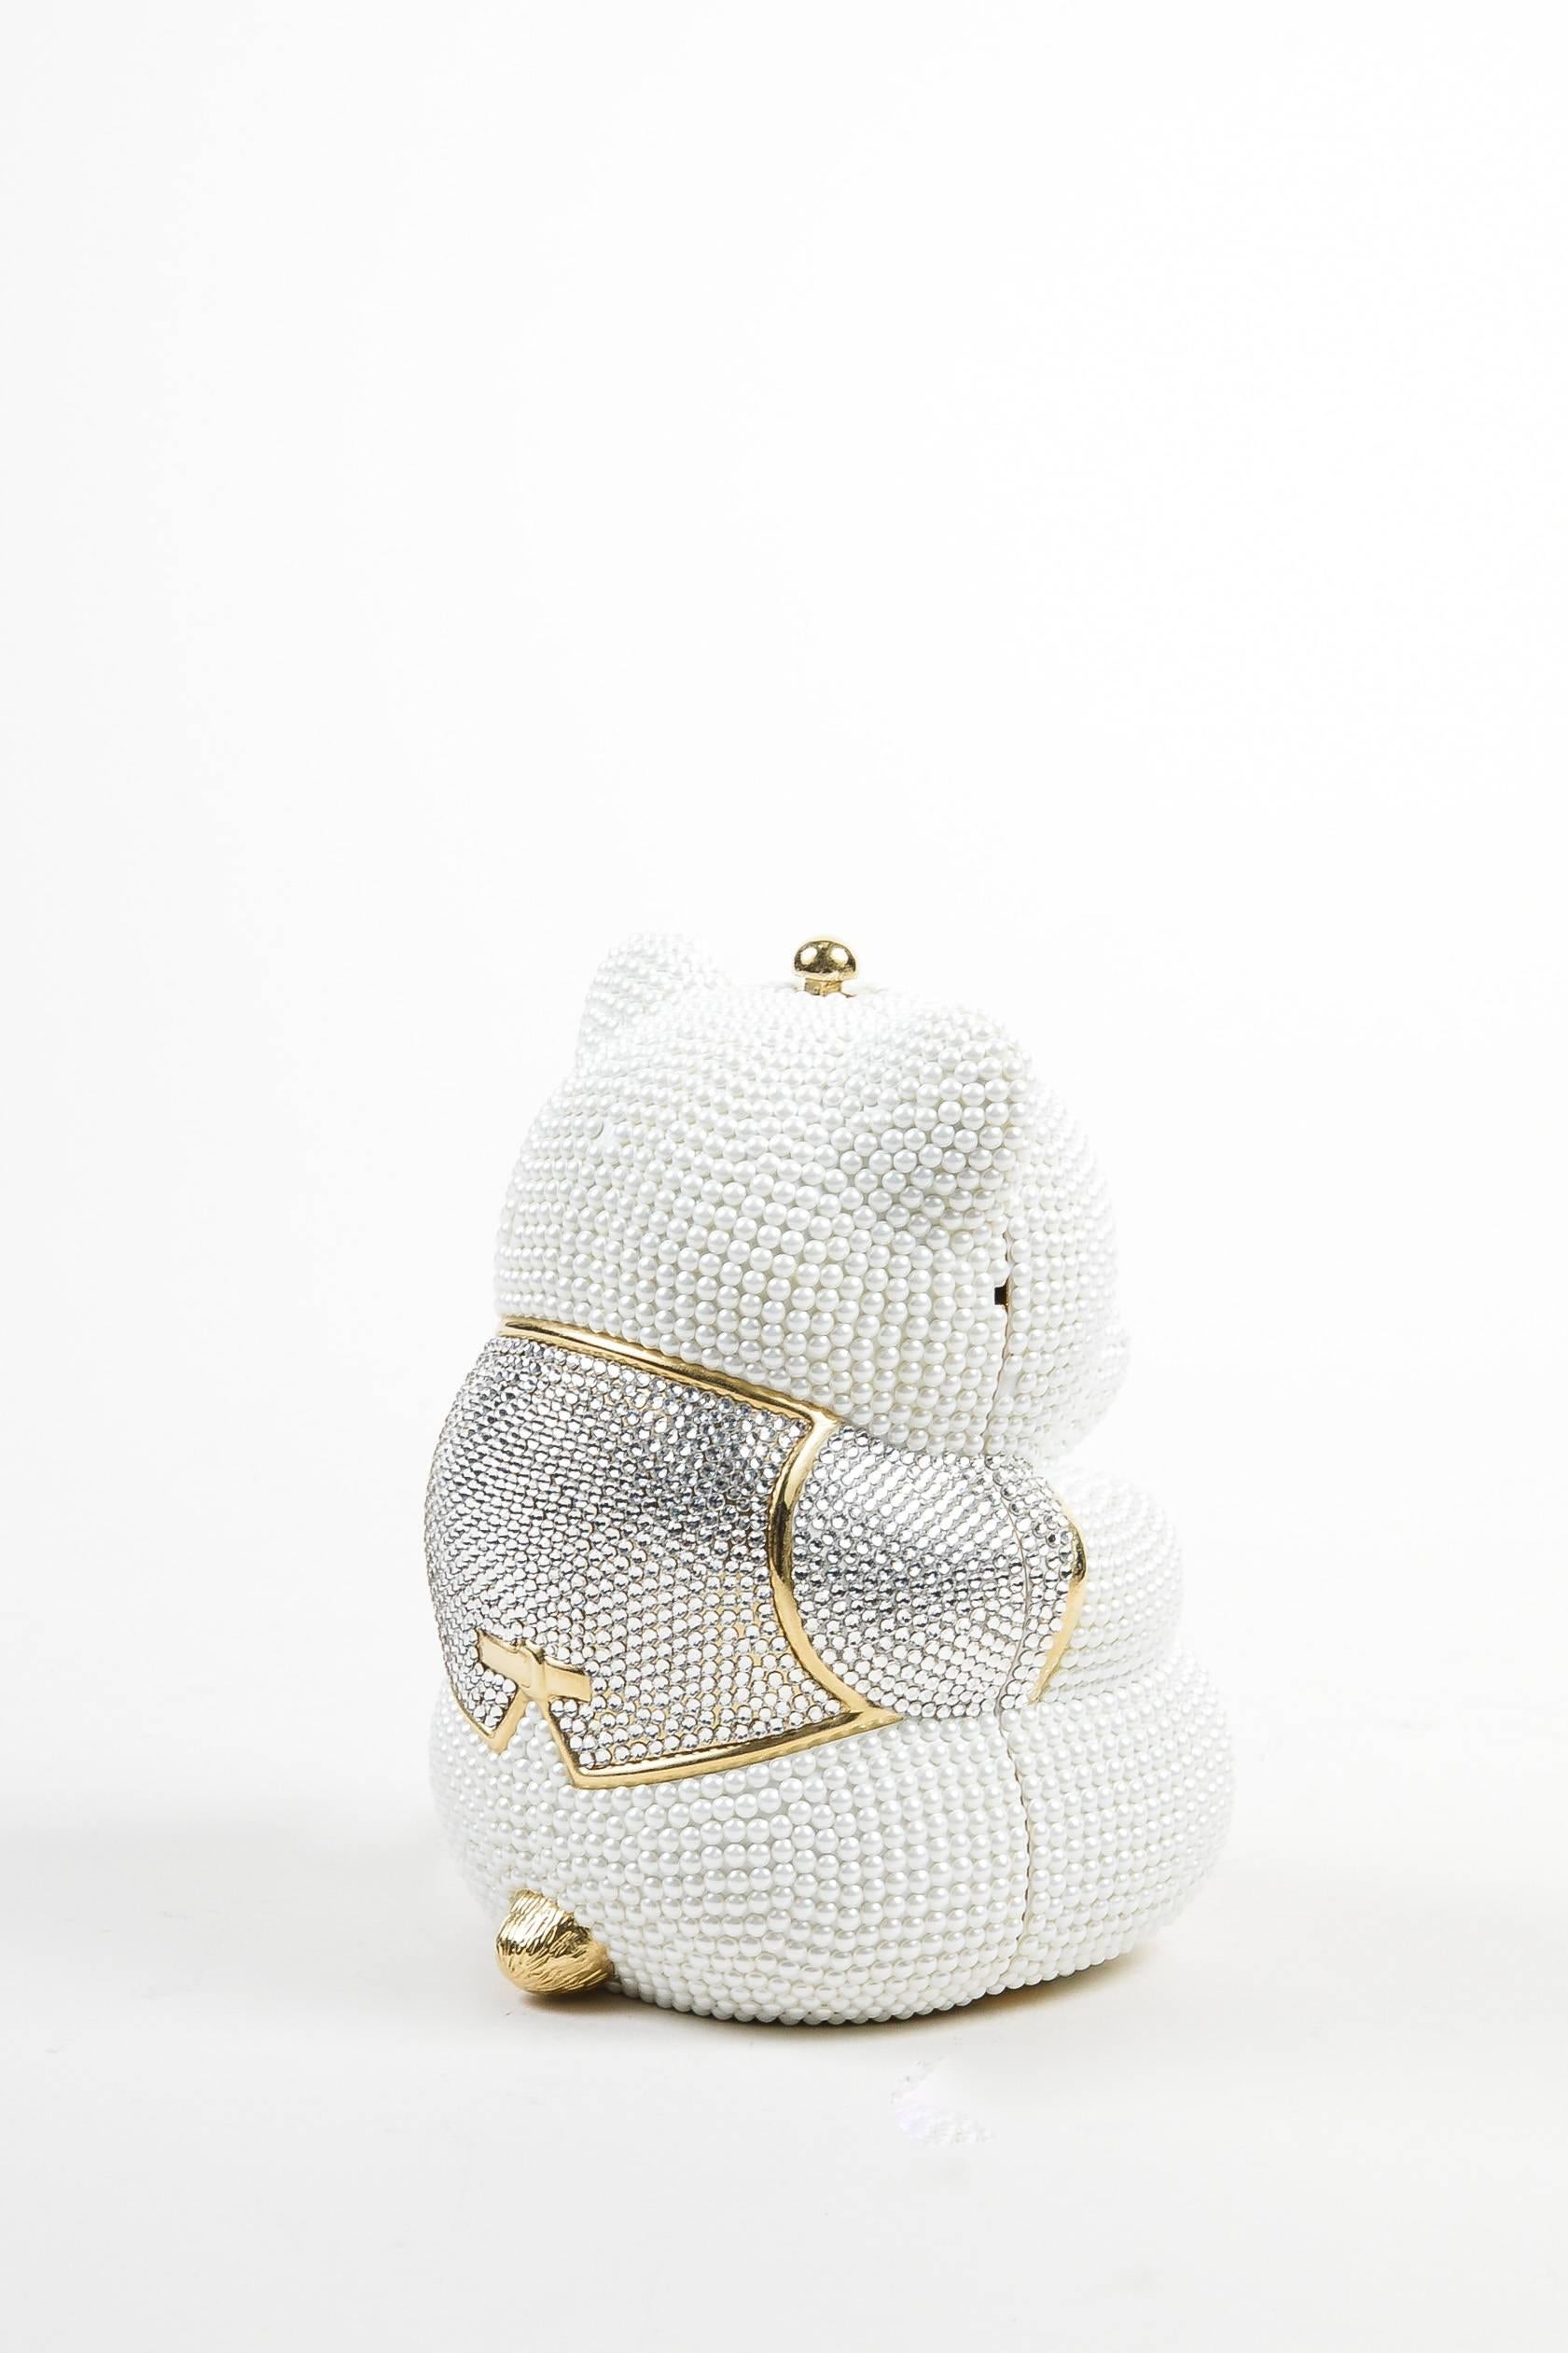 Retails at $4695. This whimsical Judith Leiber Wedding minaudiere is shaped like a glittering teddy bear. White faux pearls and clear rhinestones with gold-tone metallic accents. This small clutch bag is the perfect conversation piece for your next